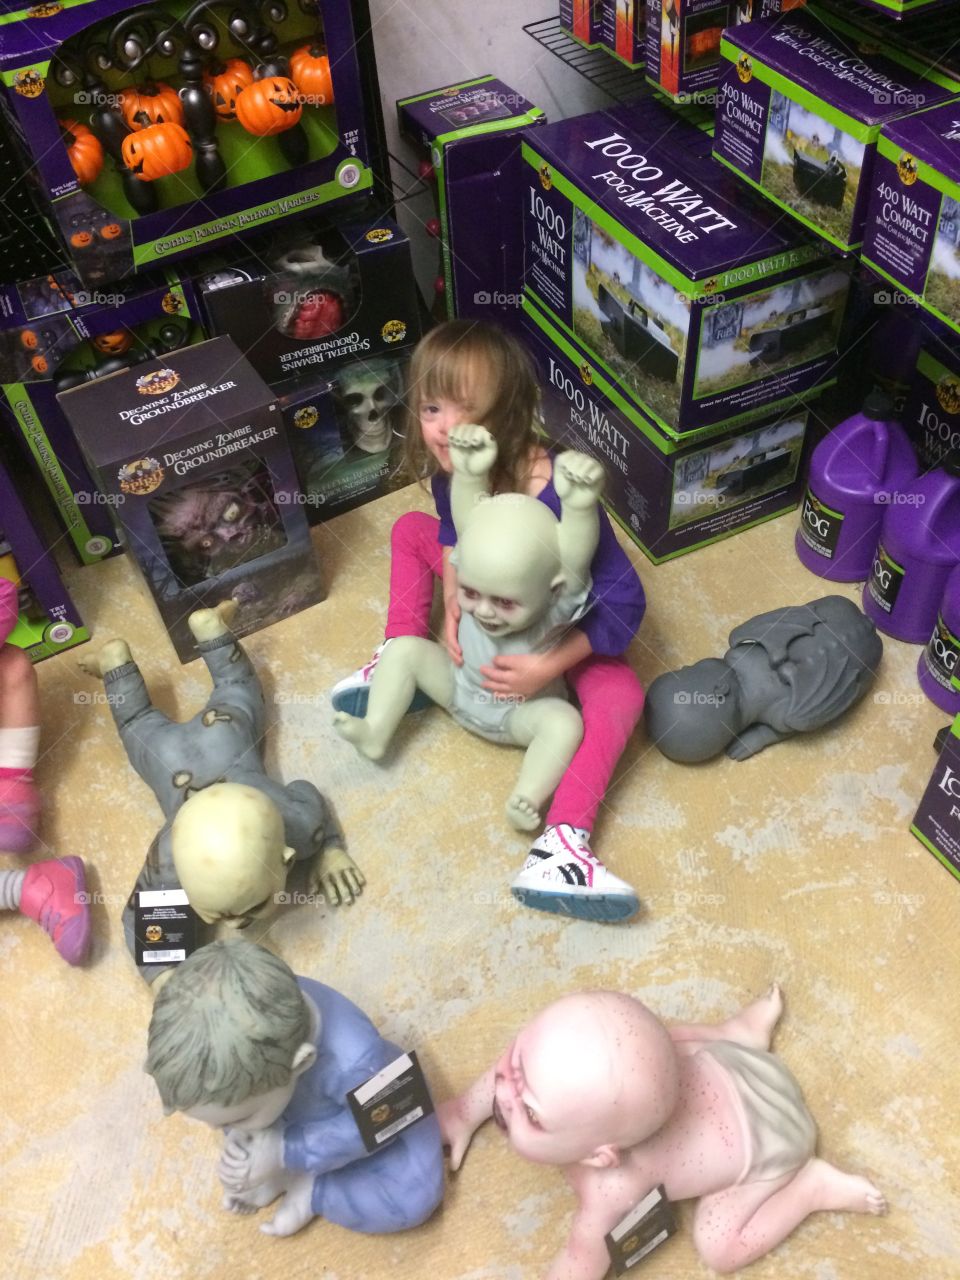 Little girl with Down syndrome at the Halloween store